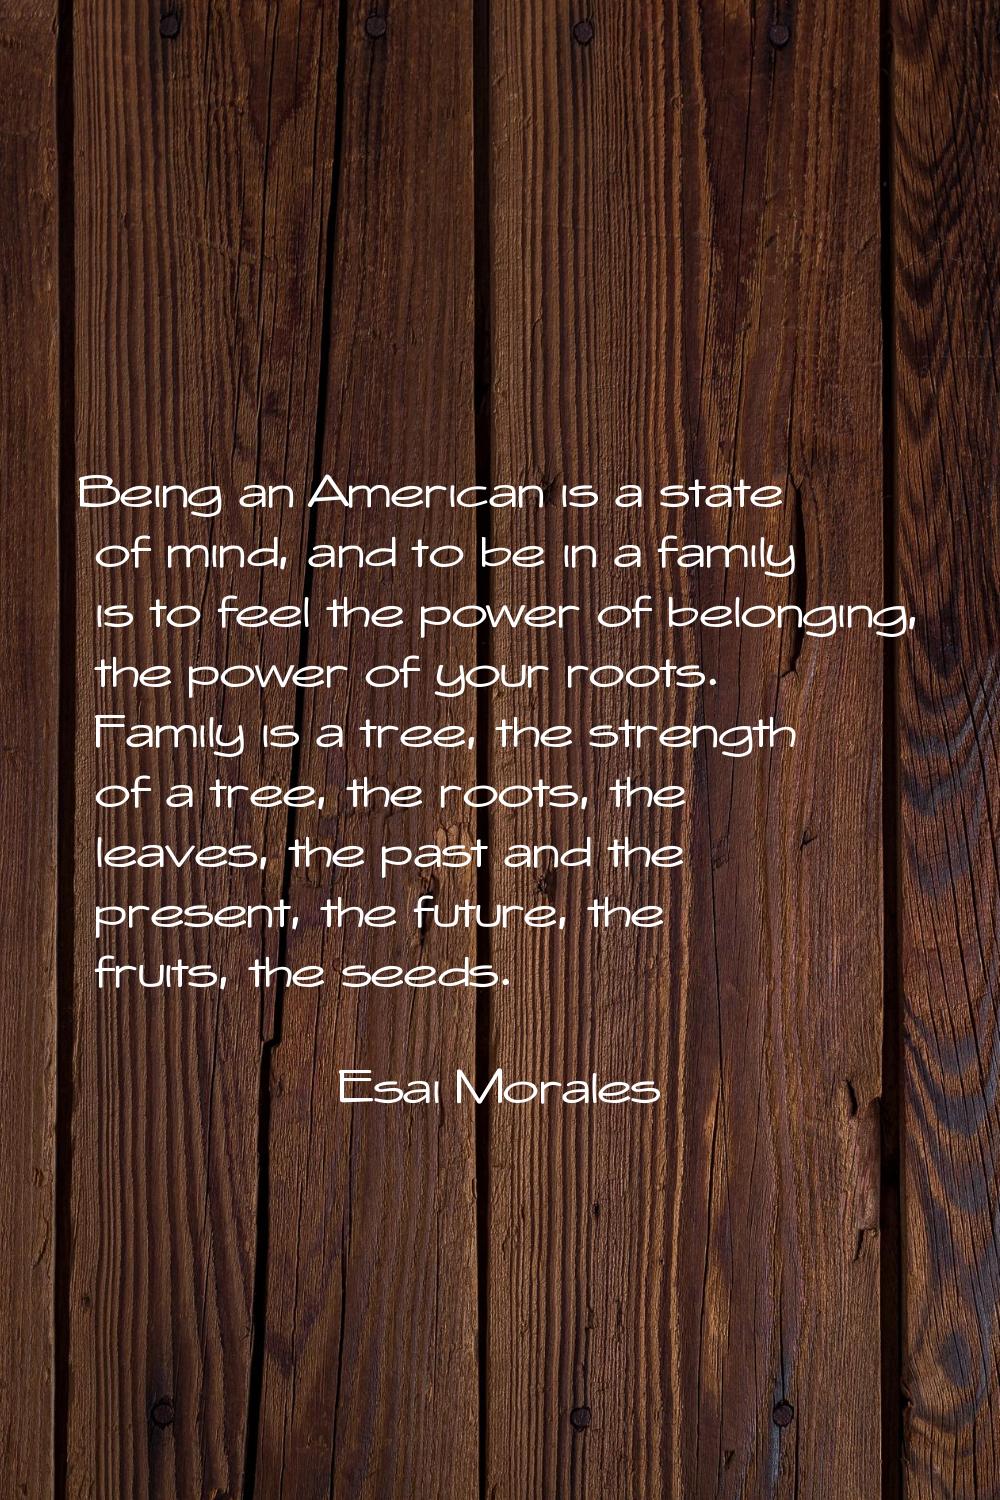 Being an American is a state of mind, and to be in a family is to feel the power of belonging, the 